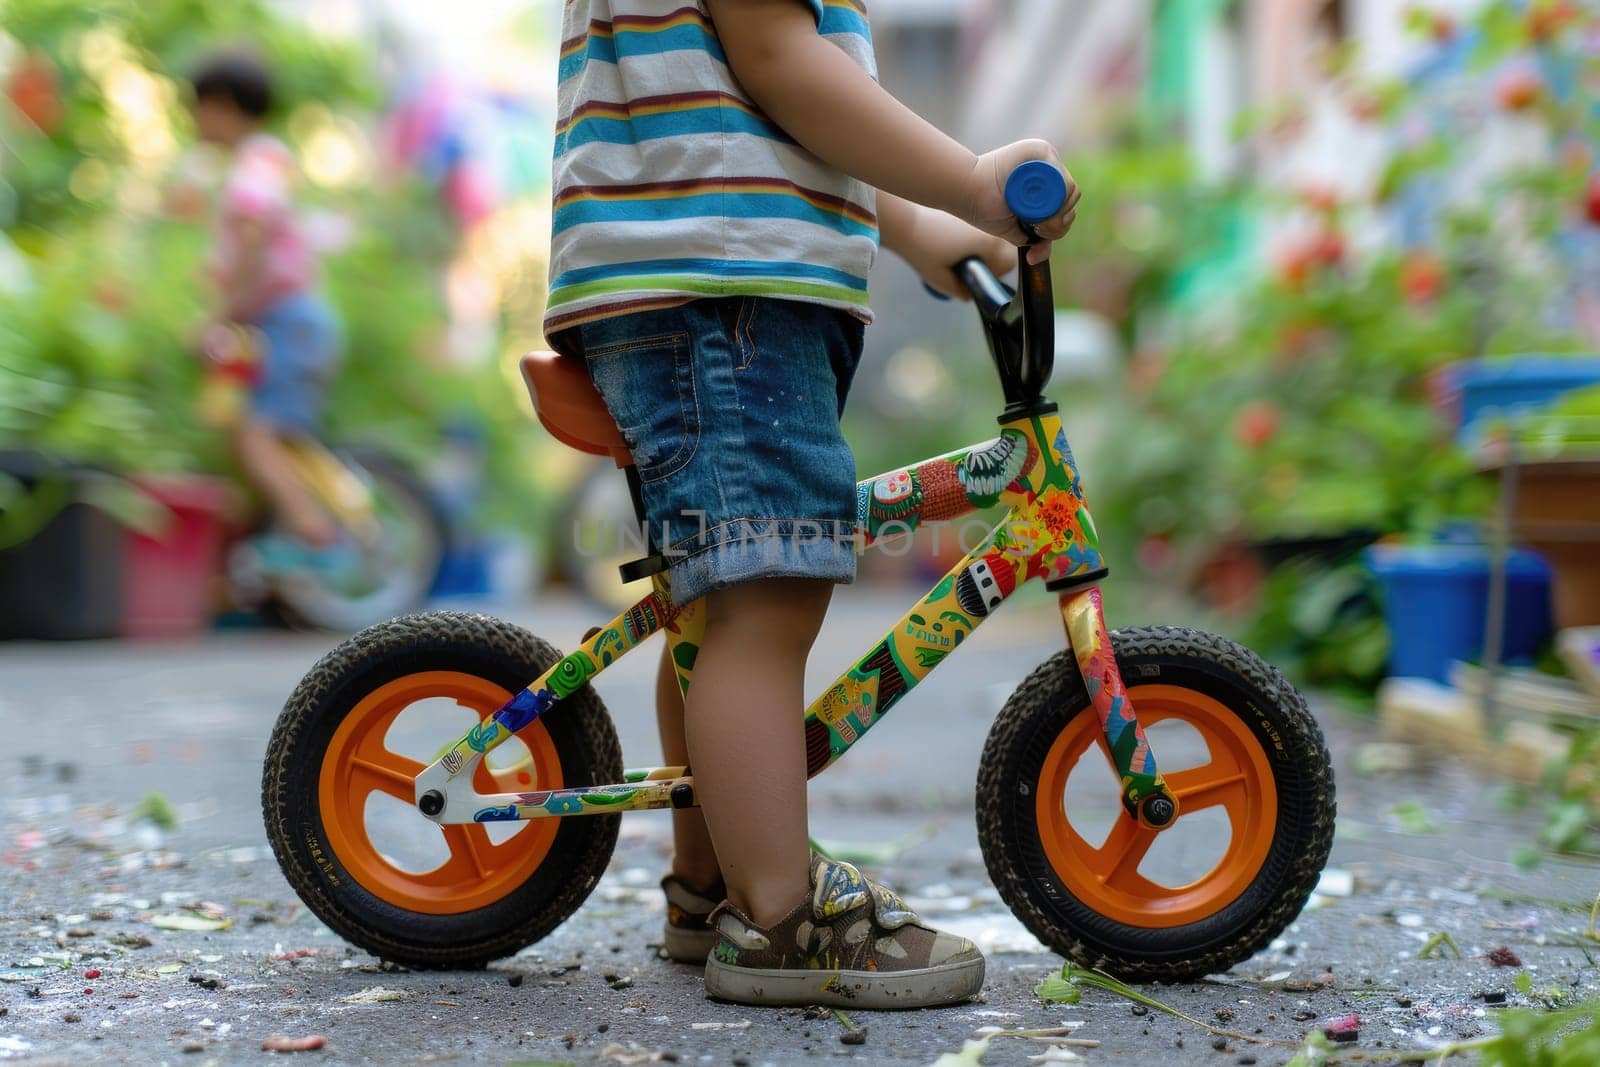 A child proudly displays their balance bike, adorned with colorful stickers and personalized accessories.